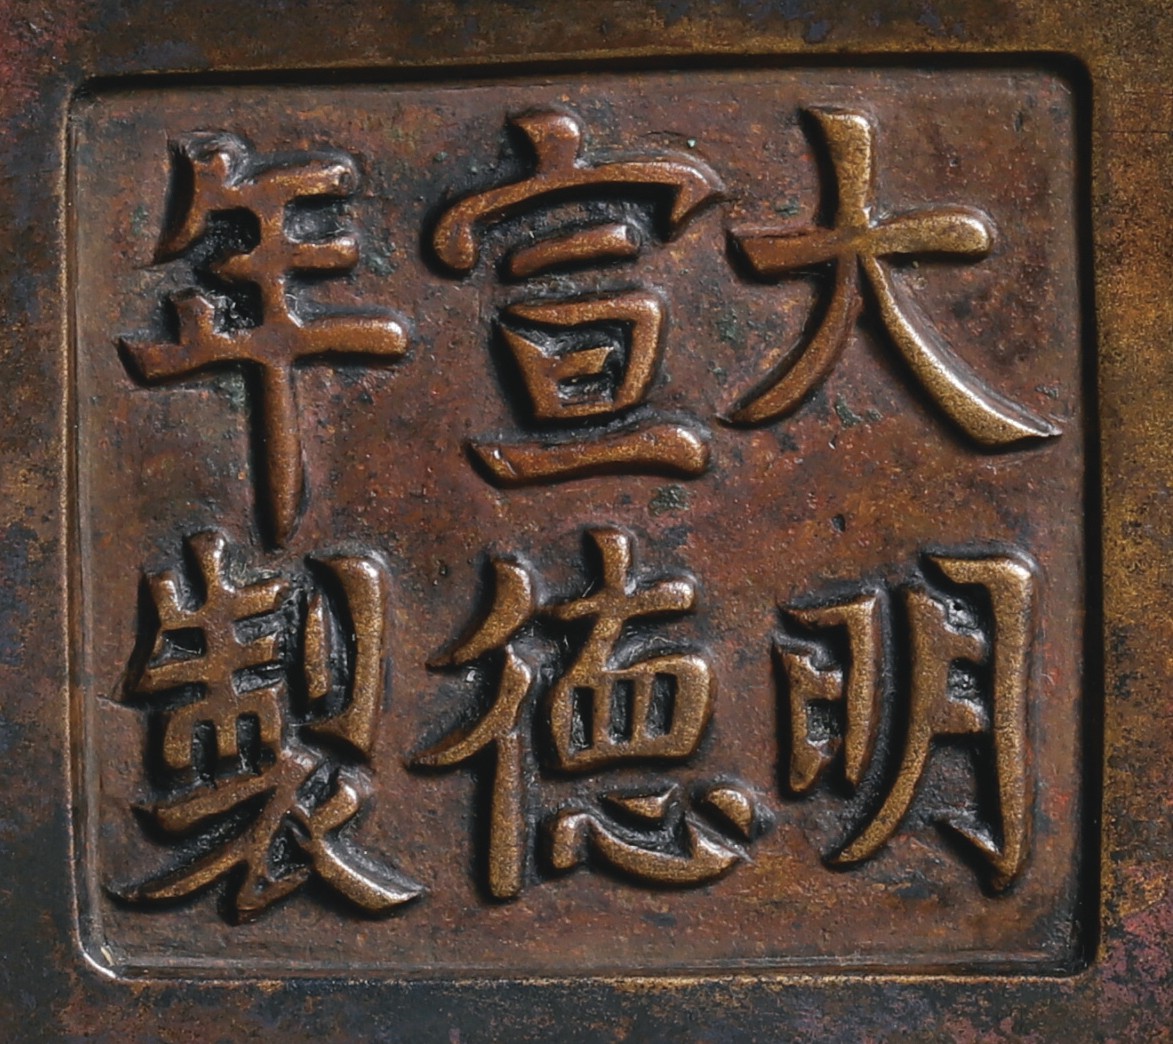 A BRONZE CENSER, LATE MING/EARLY QING DYNASTY | 明末/清初 銅螭龍耳爐